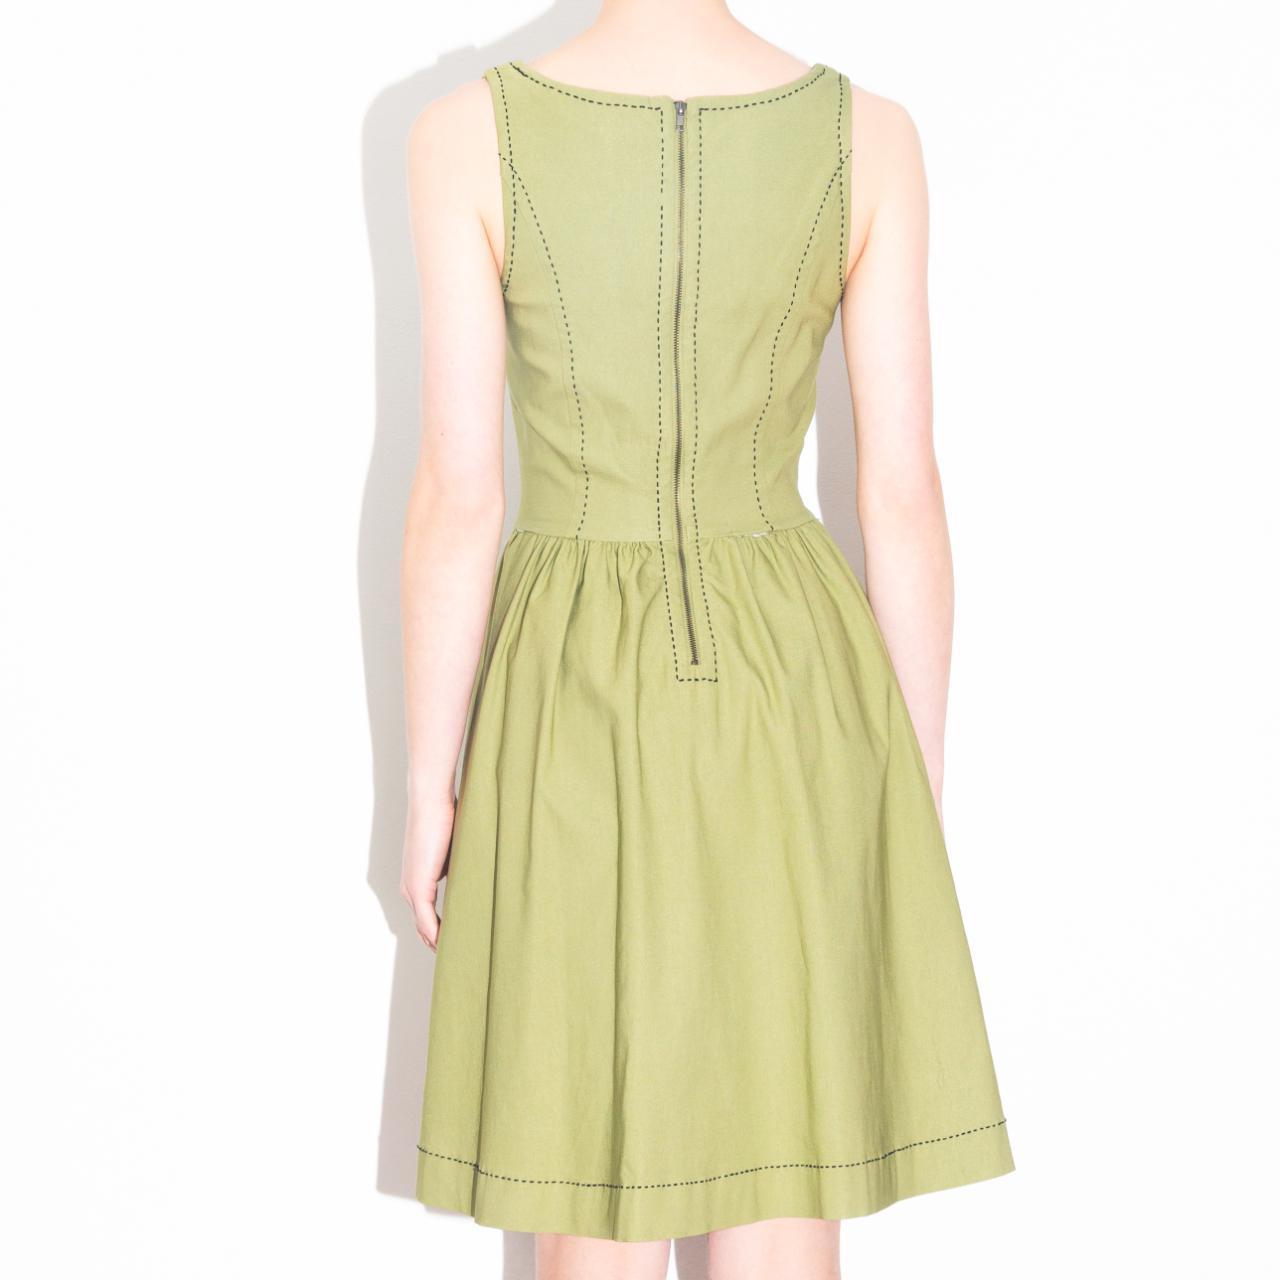 Product Image 4 - Adorable olive/army green fit and